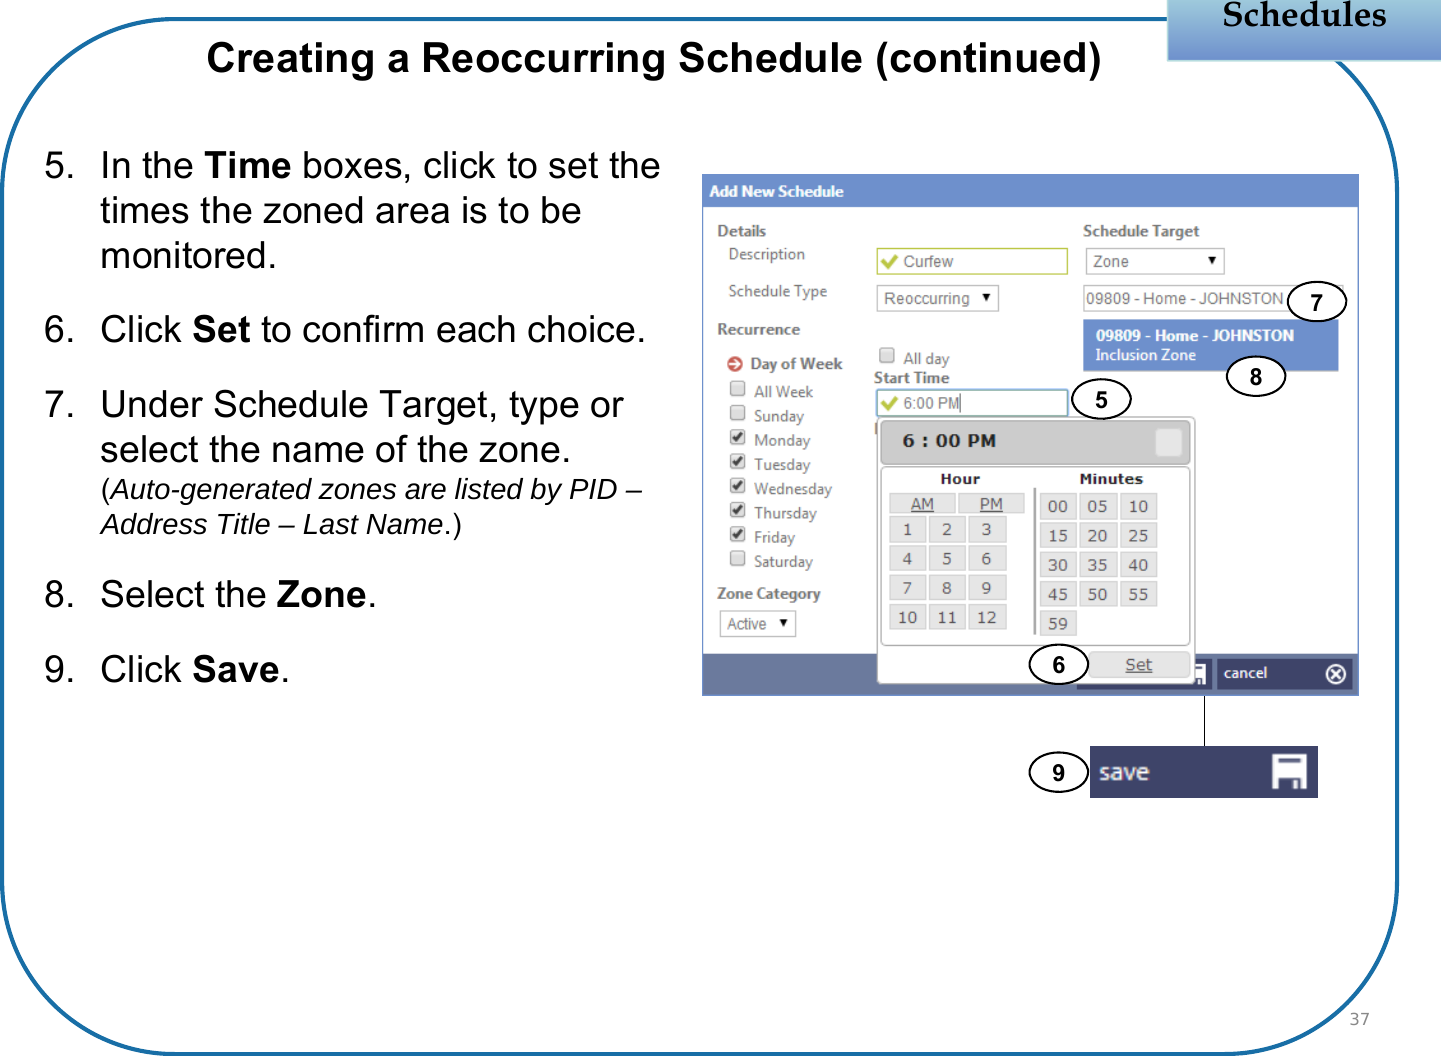 Schedules5. In the Time boxes, click to set the times the zoned area is to be monitored.6. Click Set to confirm each choice.7. Under Schedule Target, type or select the name of the zone.(Auto-generated zones are listed by PID –Address Title – Last Name.)8. Select the Zone.9. Click Save.37Creating a Reoccurring Schedule (continued)56789